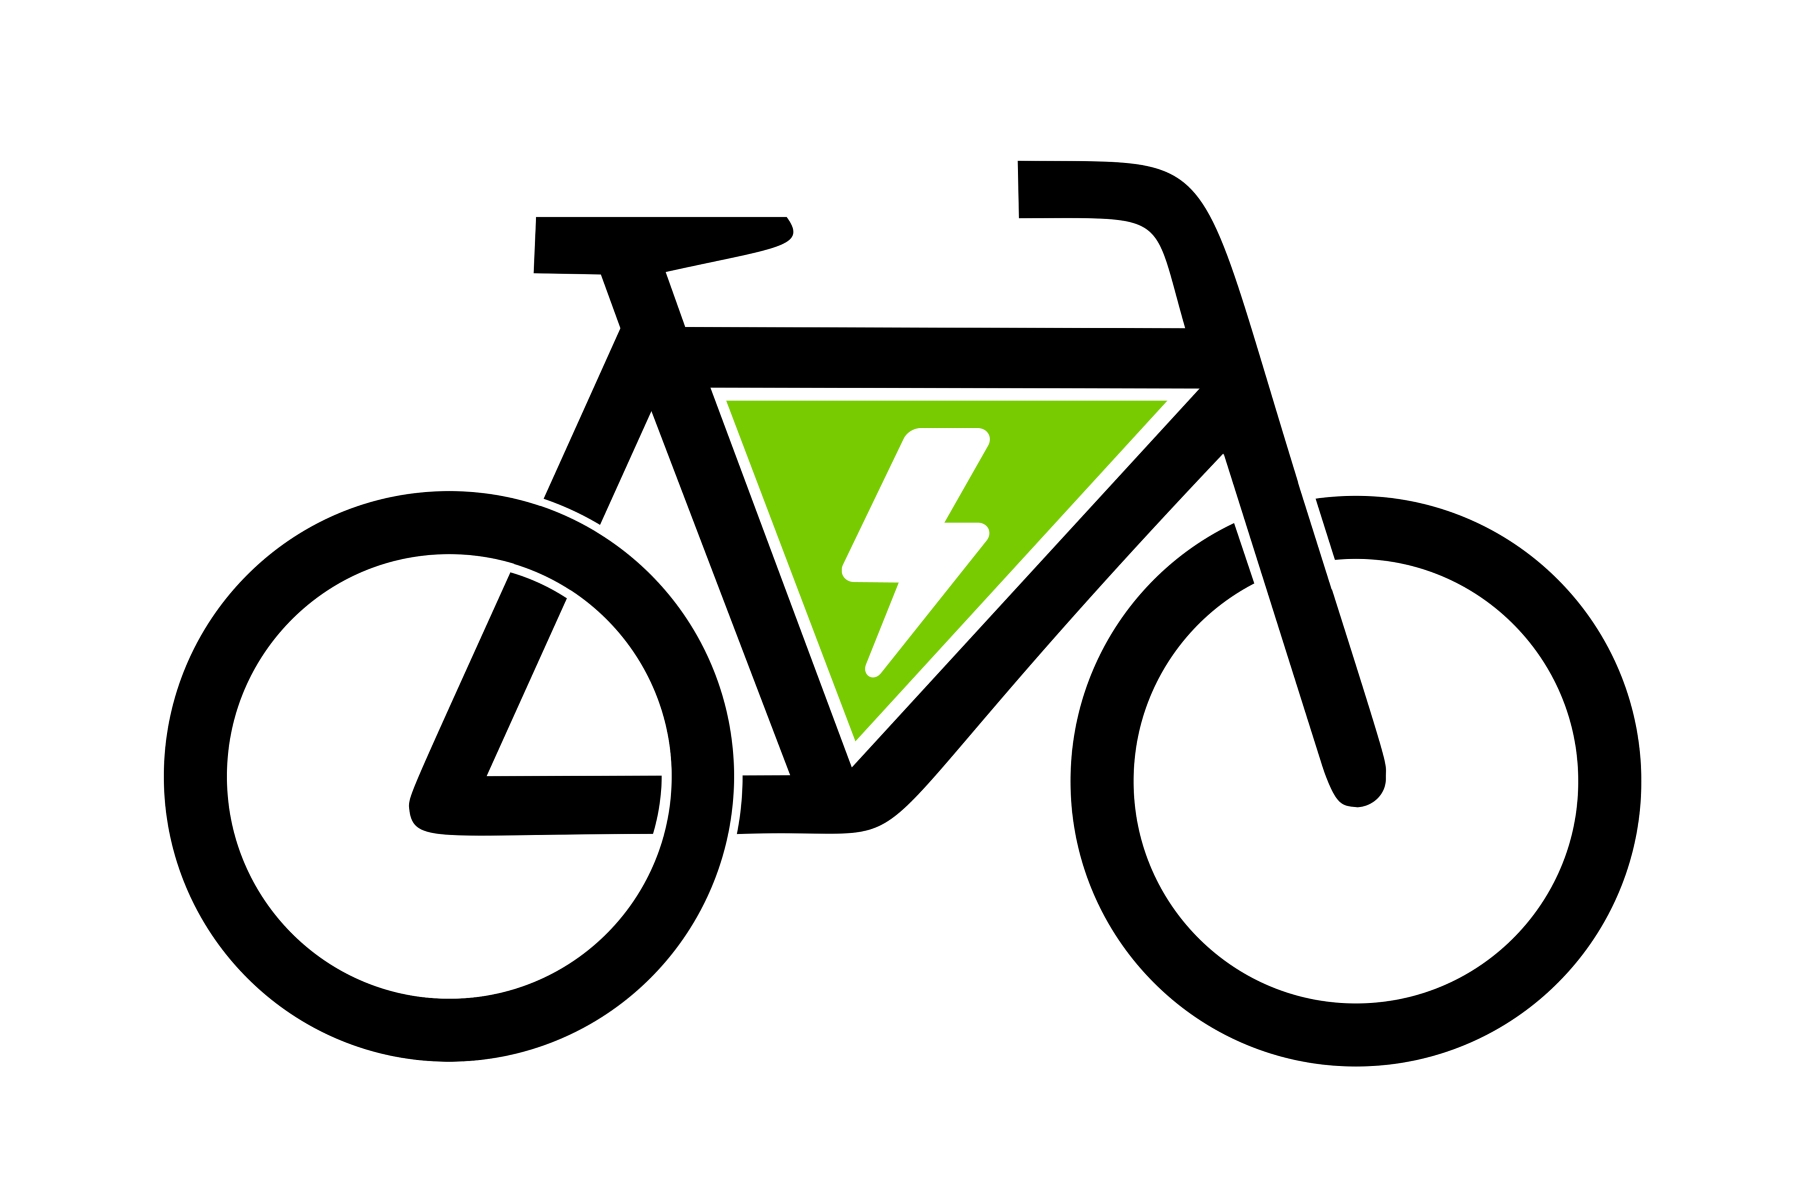 Why should I invest in an ebike?